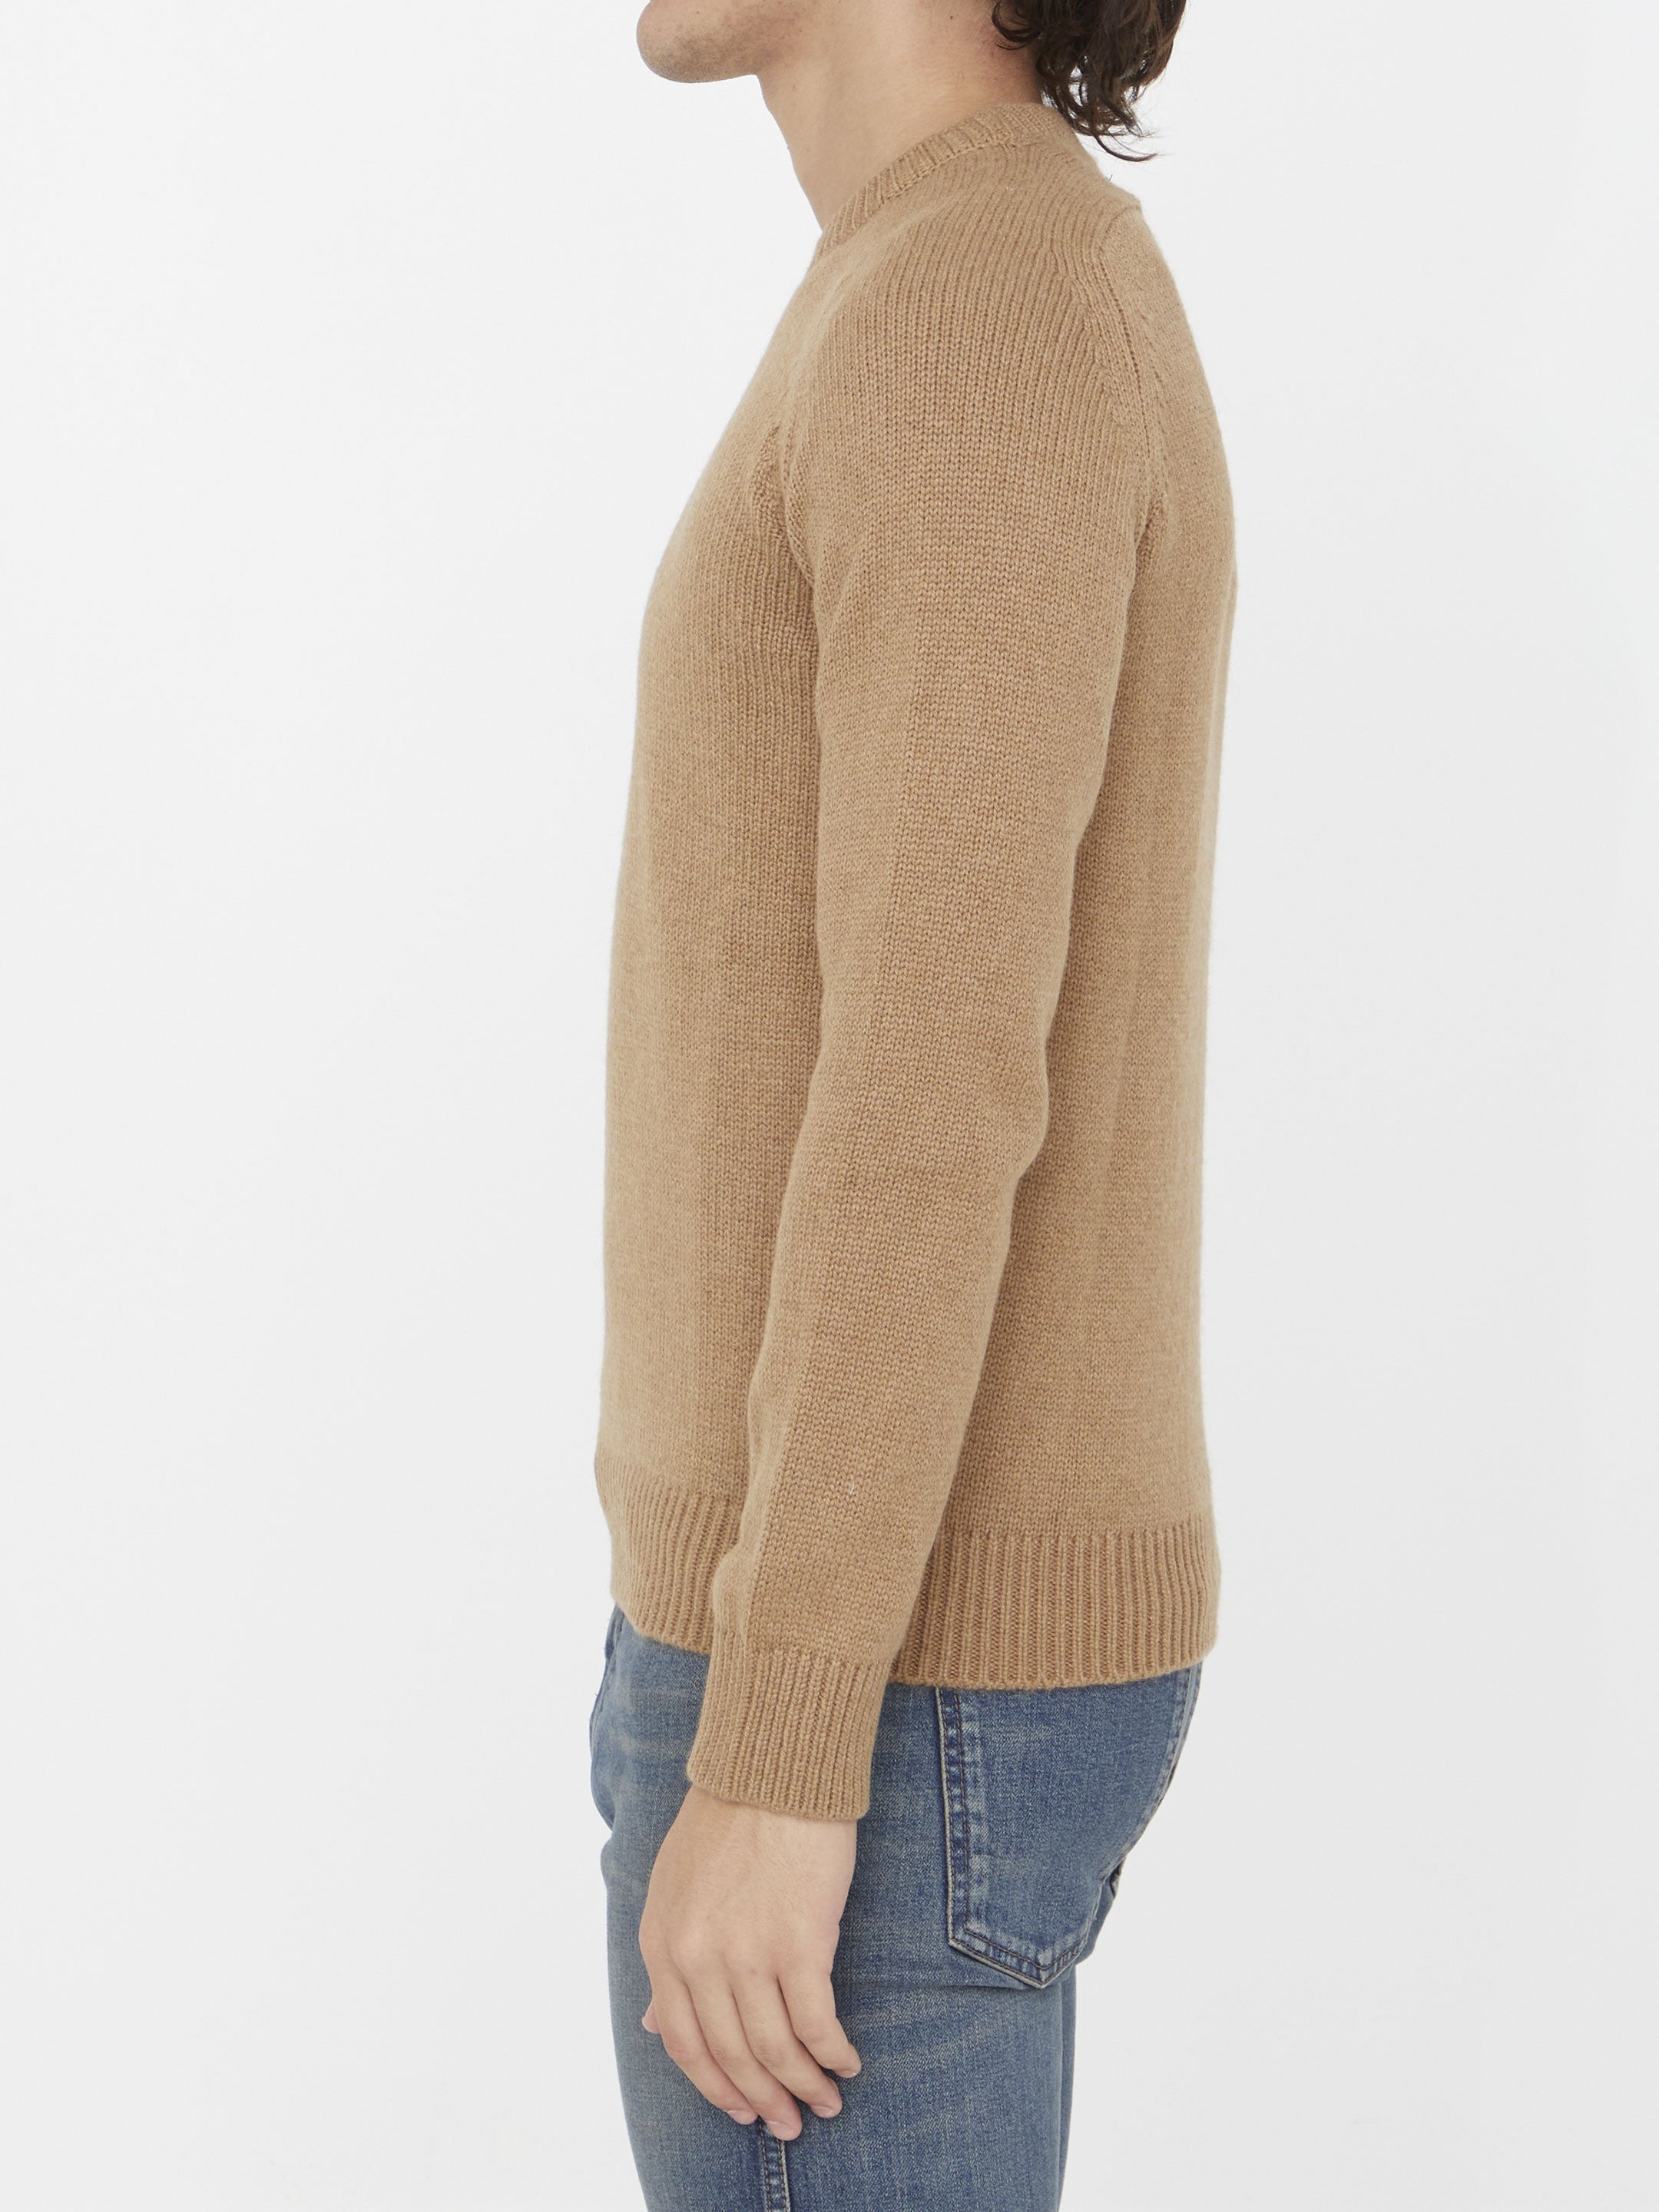 SAINT-LAURENT-OUTLET-SALE-Wool-sweater-Strick-ARCHIVE-COLLECTION-3.jpg